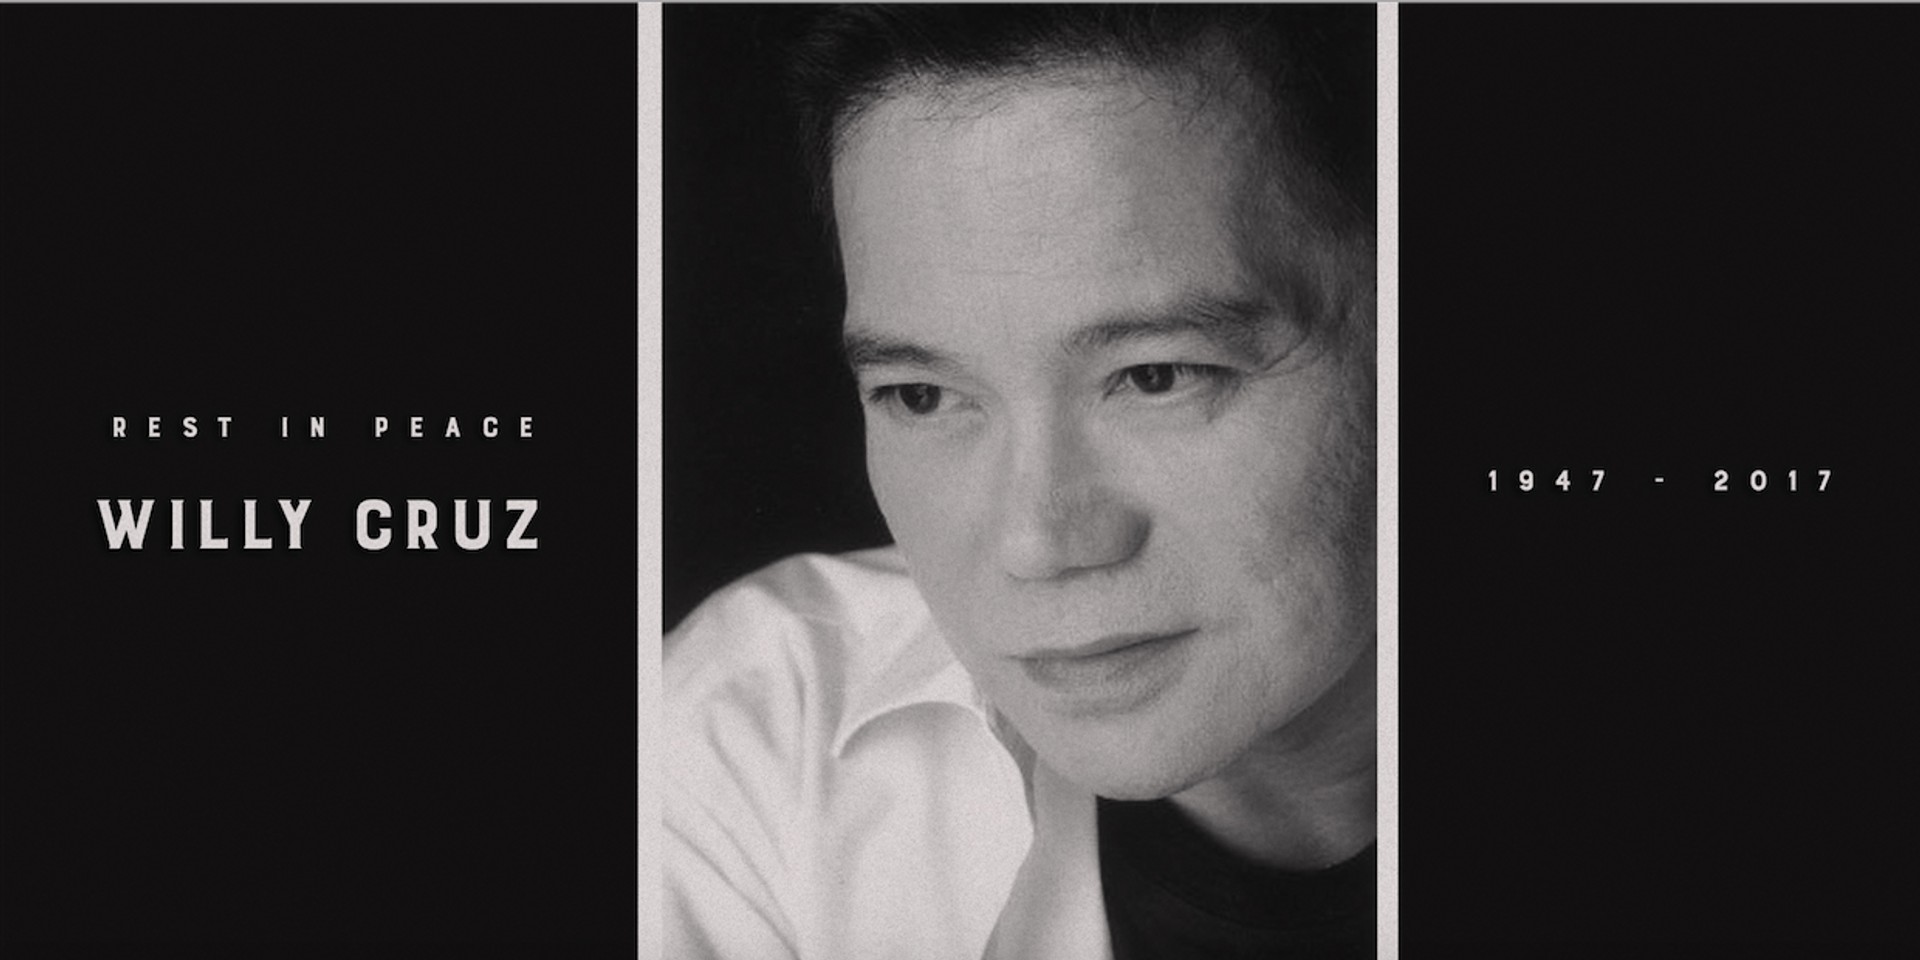 Renowned Filipino songwriter and film score composer Willy Cruz passes away at 70